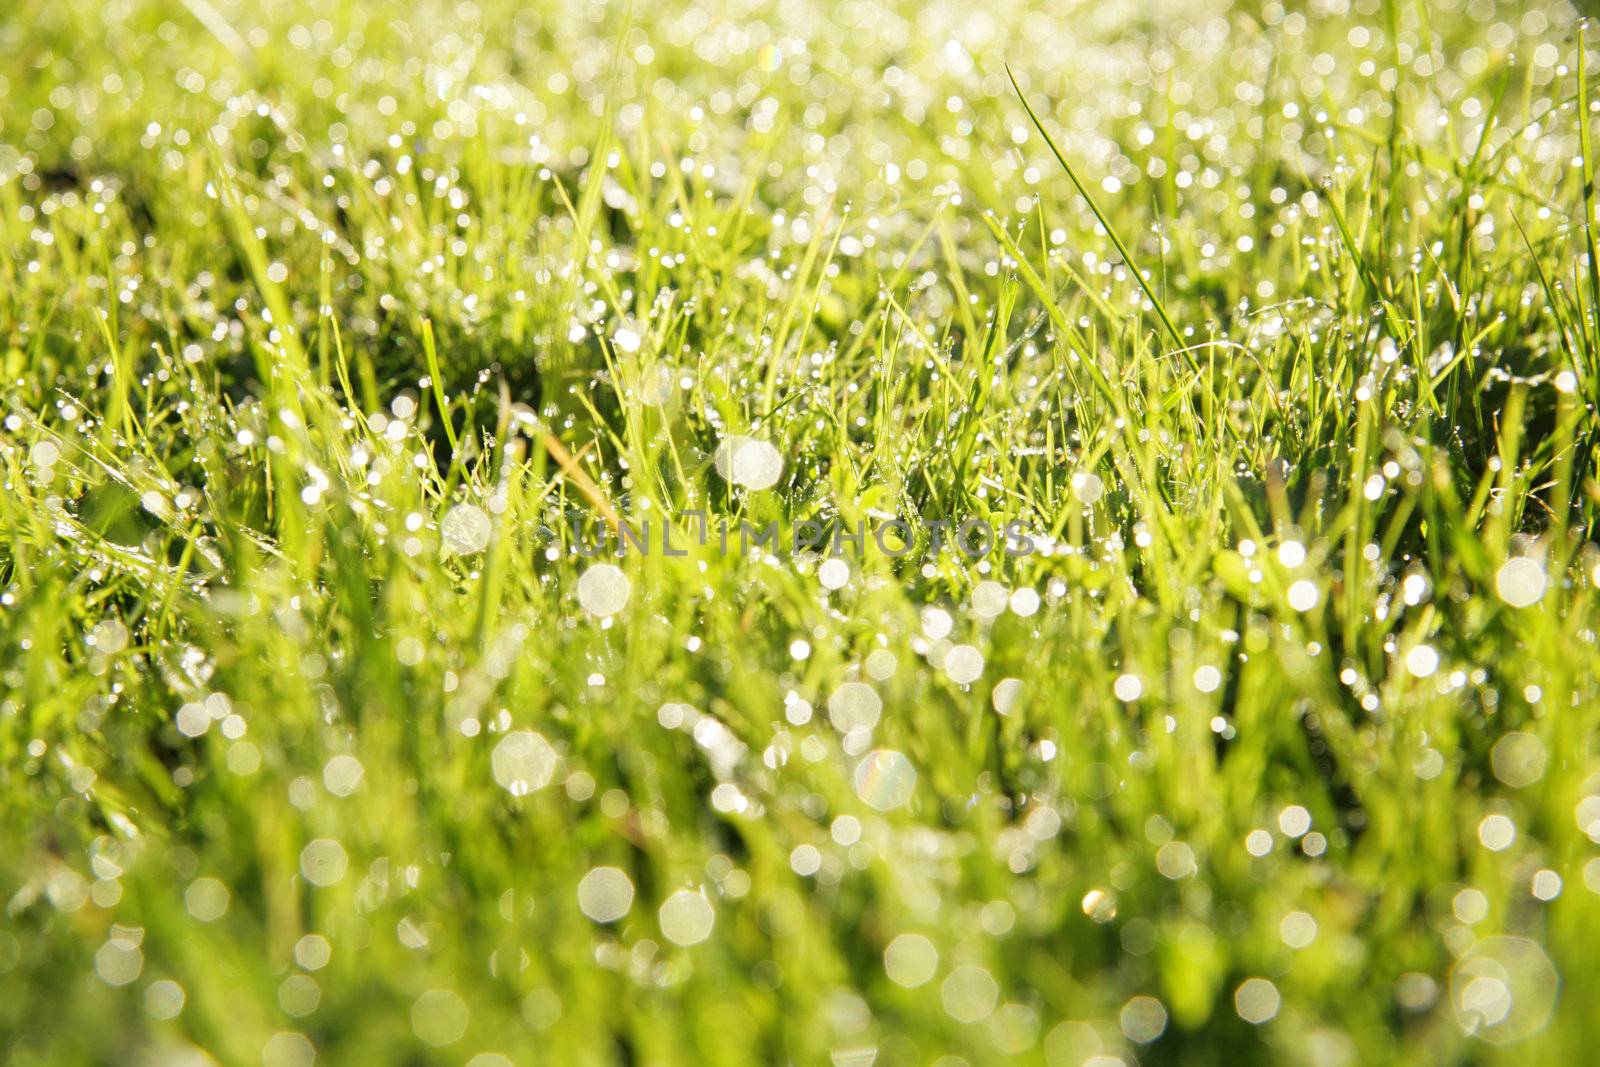 close-up of grass with dewdros, very shallow focus











